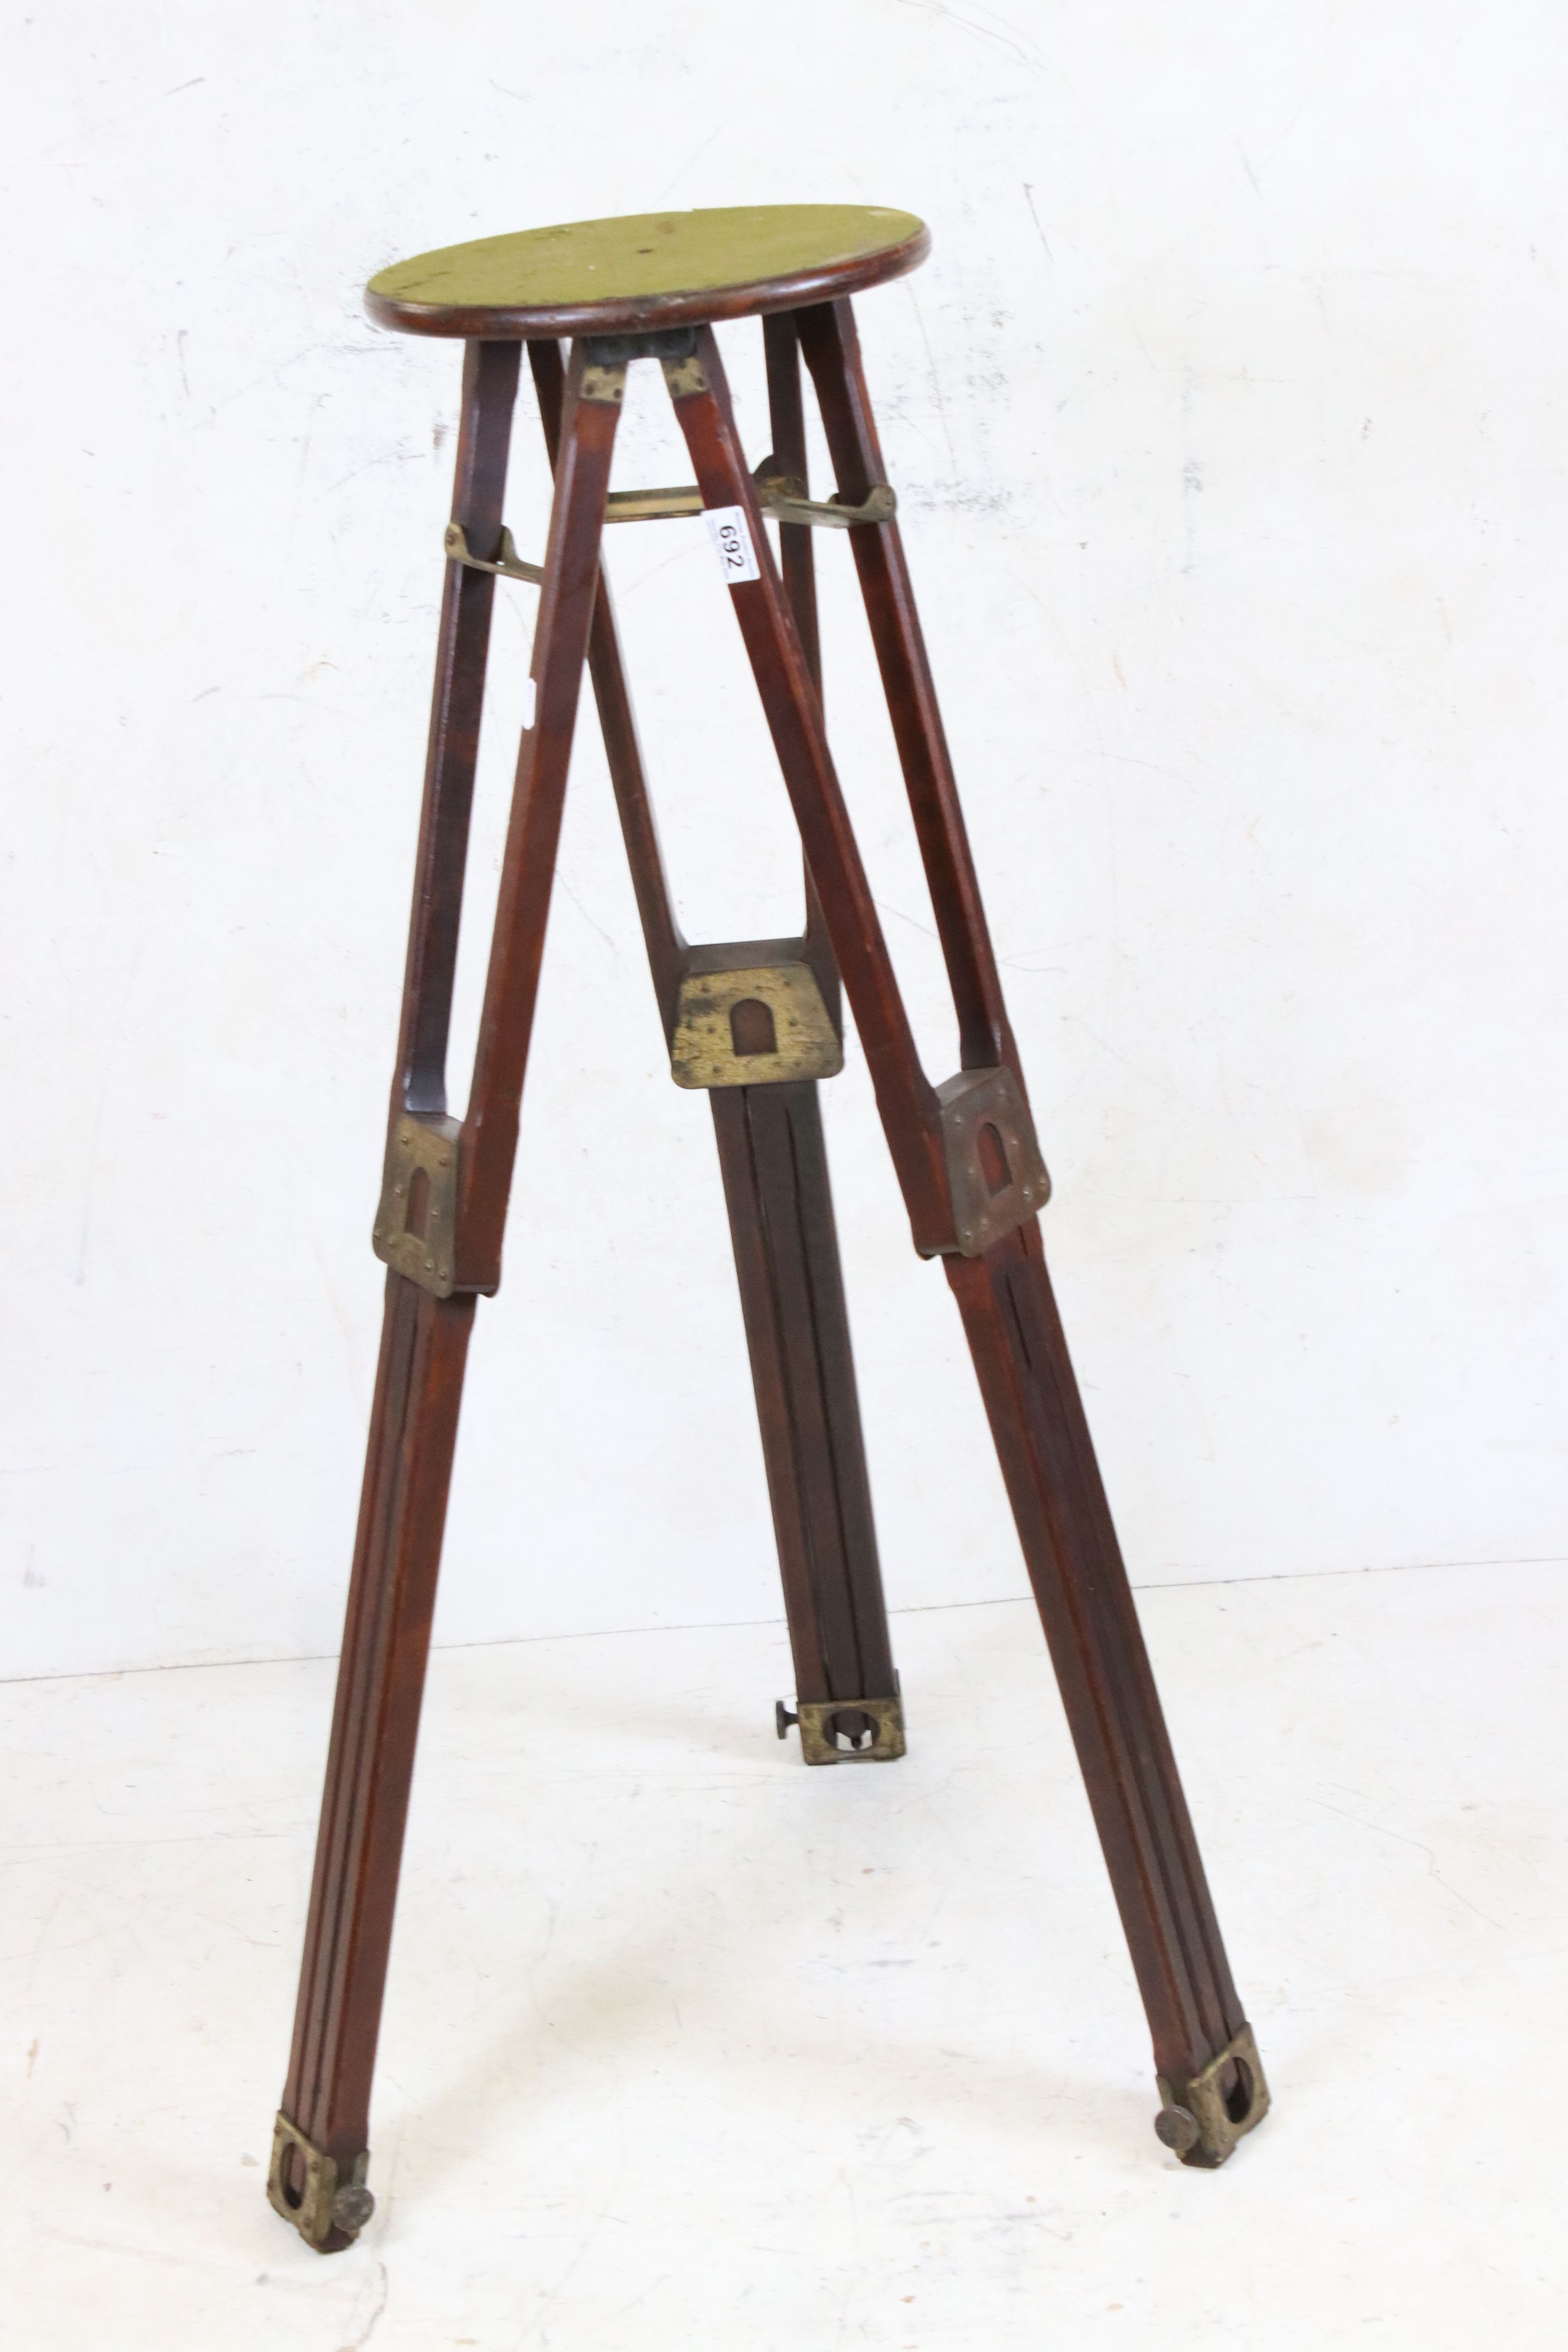 Early 20th century Folmer & Schwing Division for Eastman Kodak of New York Wooden Telescopic